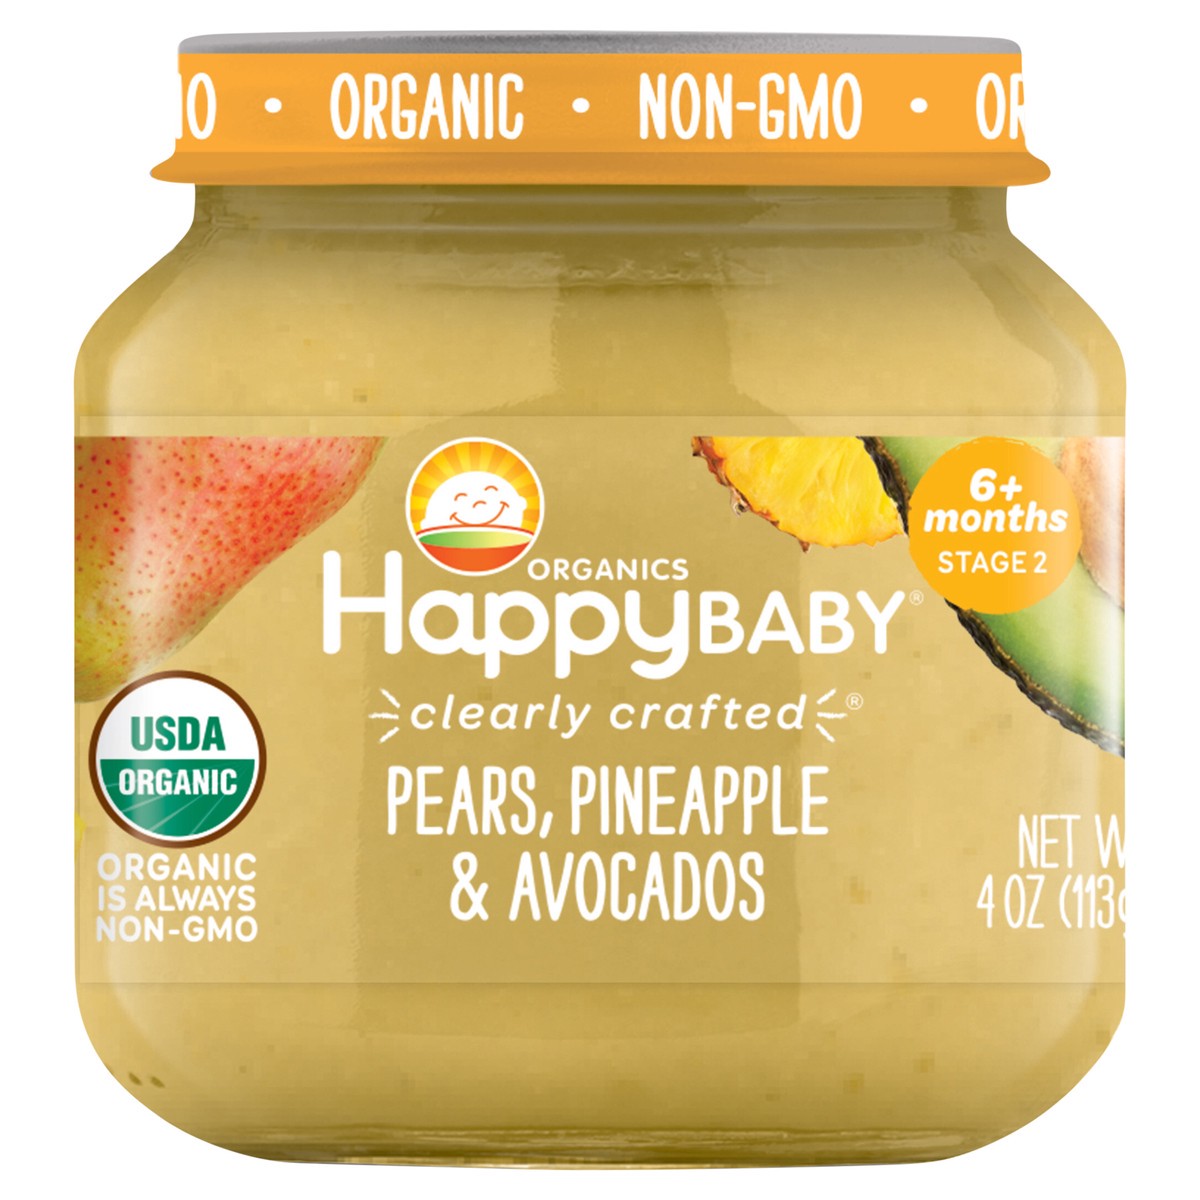 slide 1 of 3, Happy Baby Organics Clearly Crafted Stage 2 Pears, Pineapple & Avocados Jar 4 oz UNIT, 4 oz